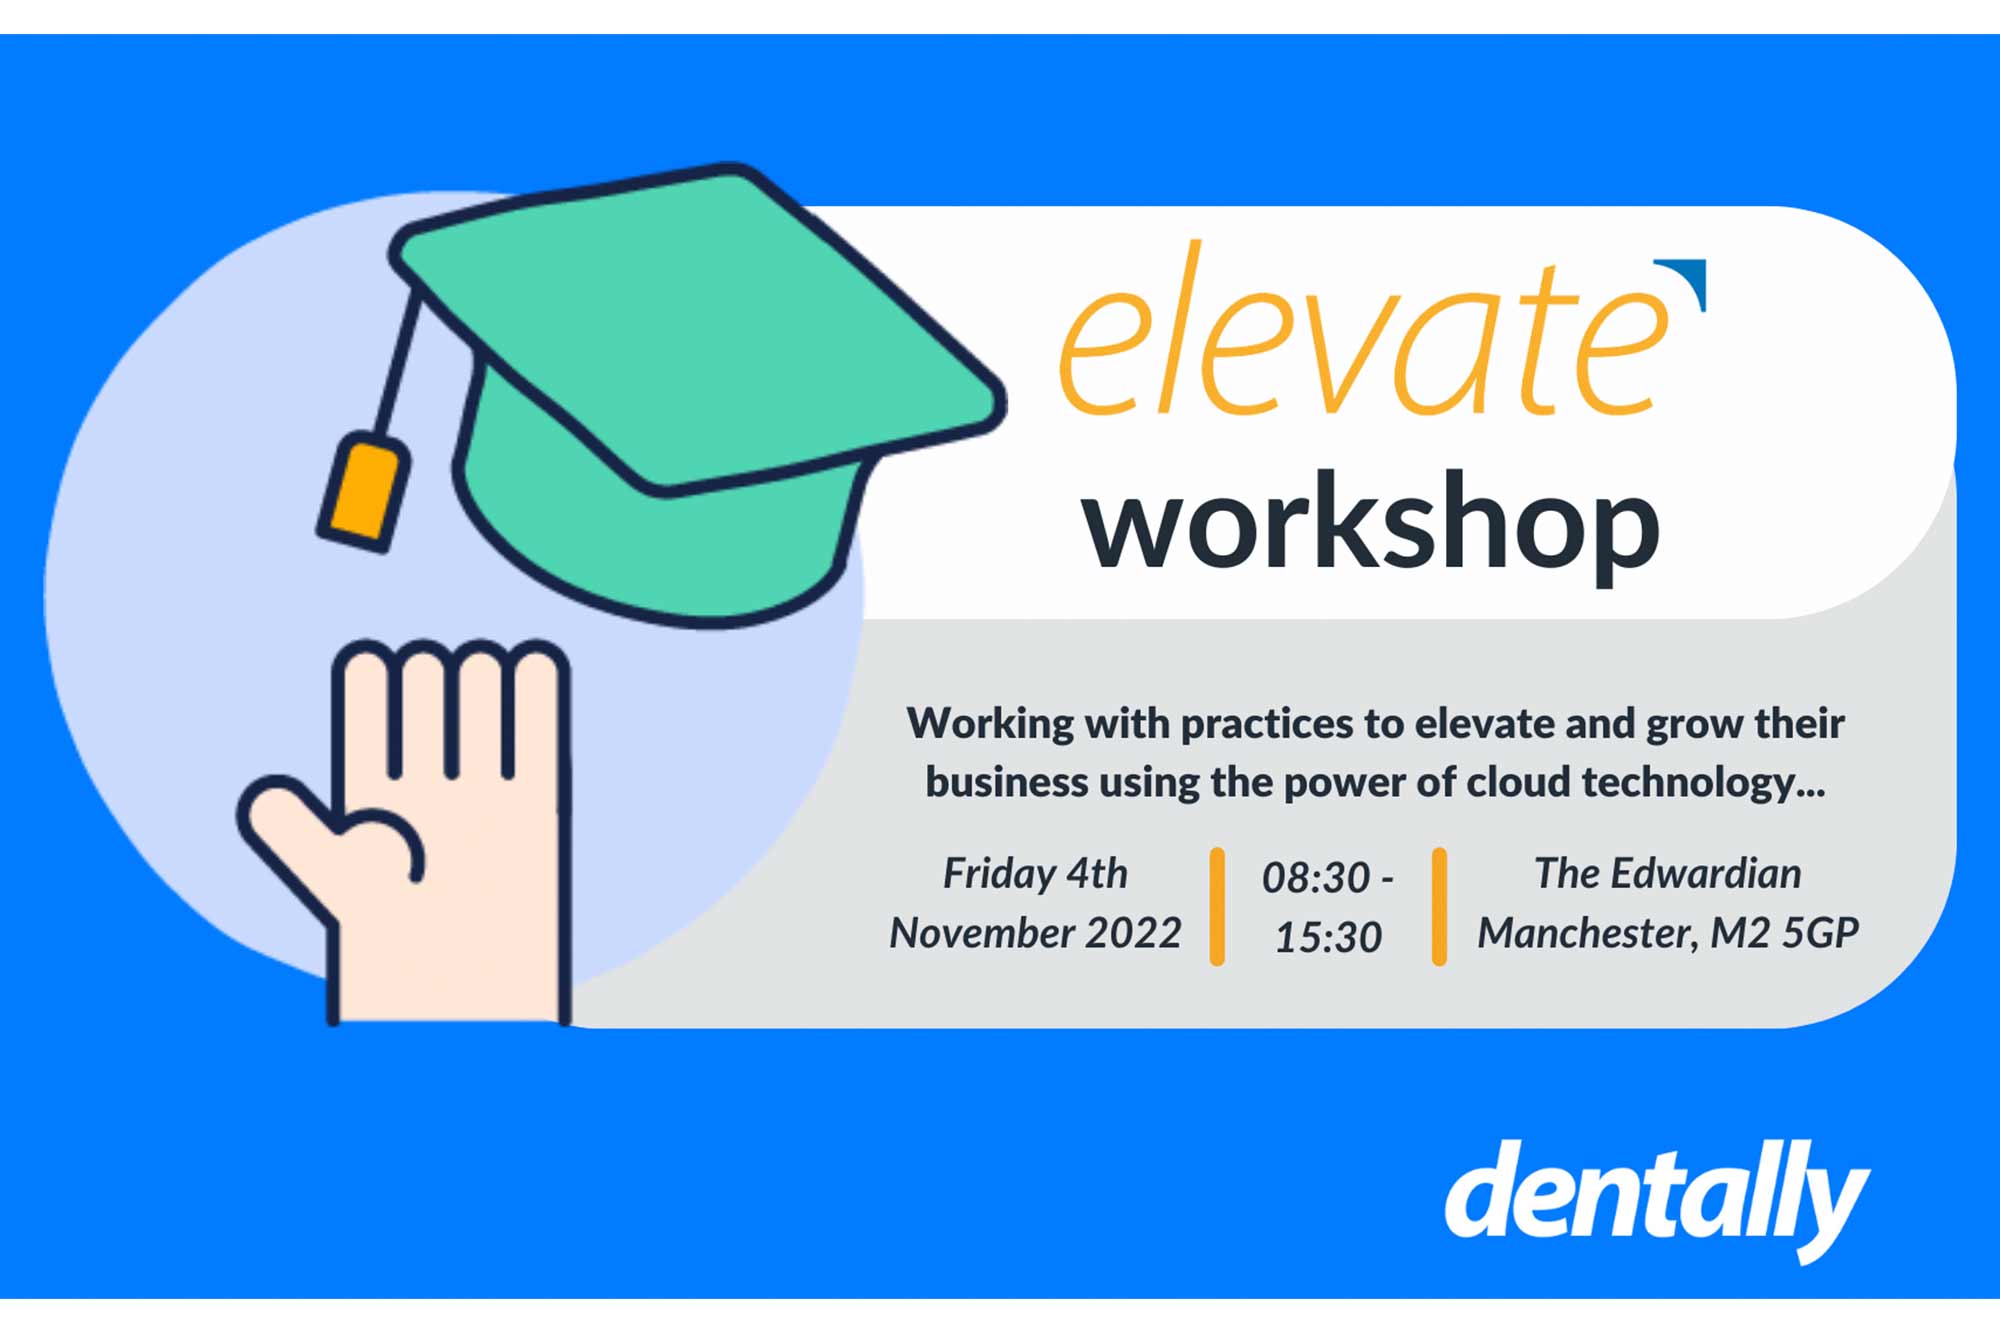 Come and see us in person at Dentally’s first ever Elevate Workshop!